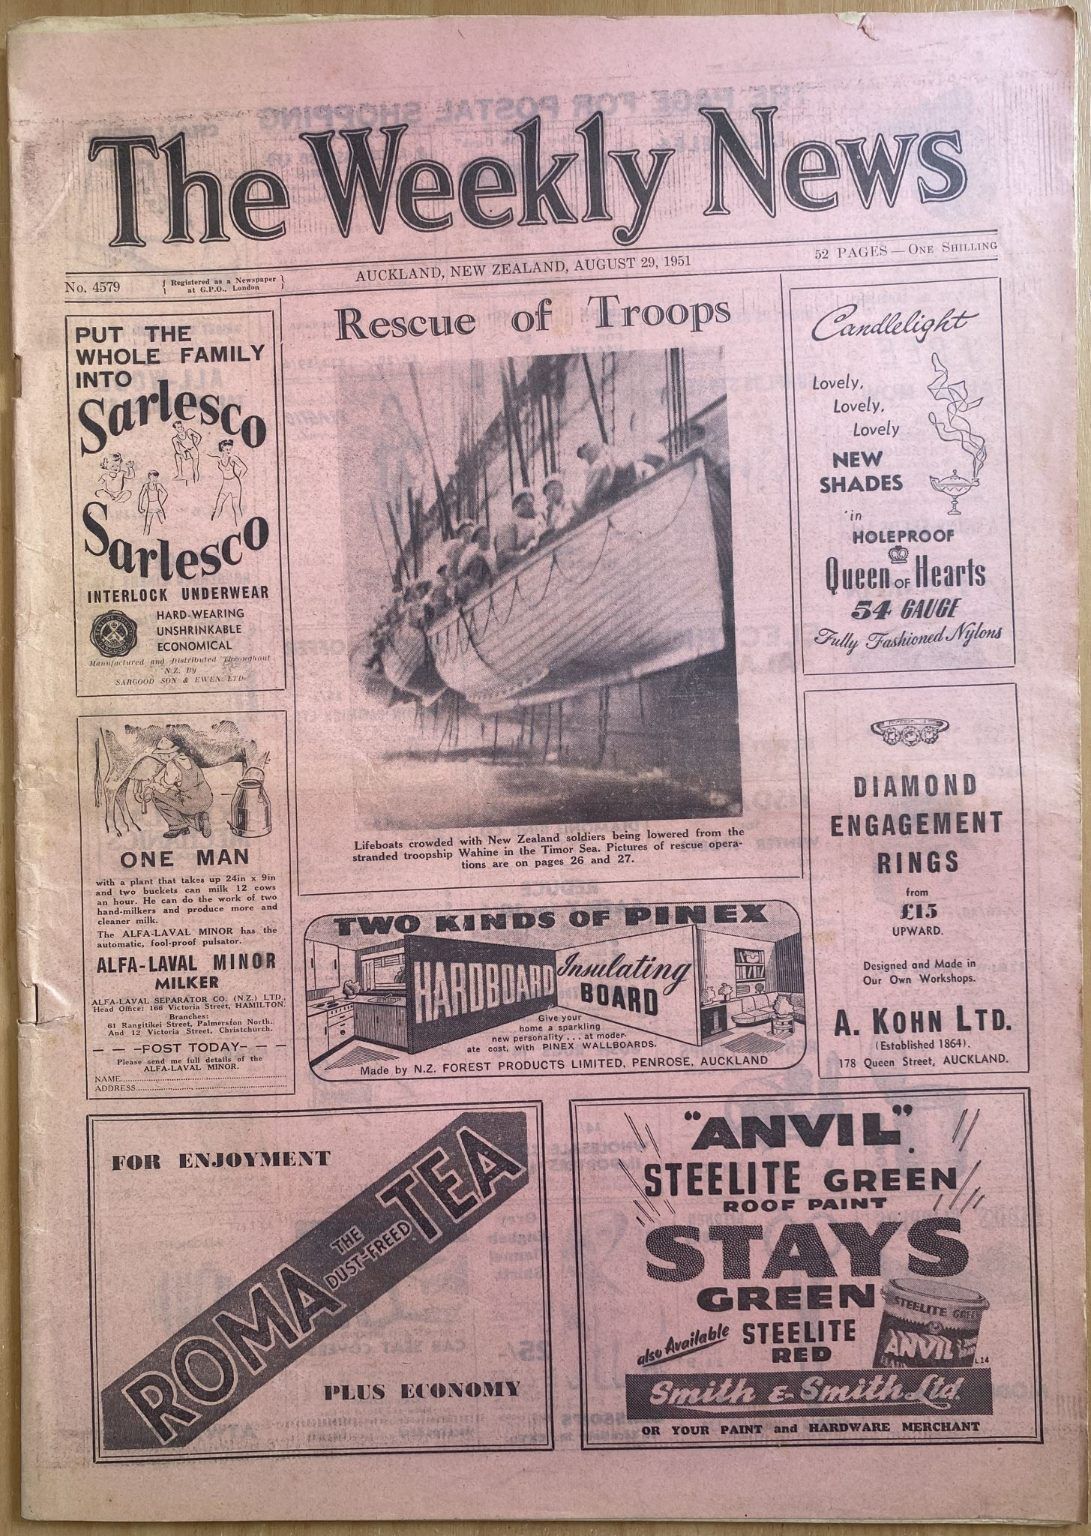 OLD NEWSPAPER: The Weekly News, No. 4579, 29 August 1951